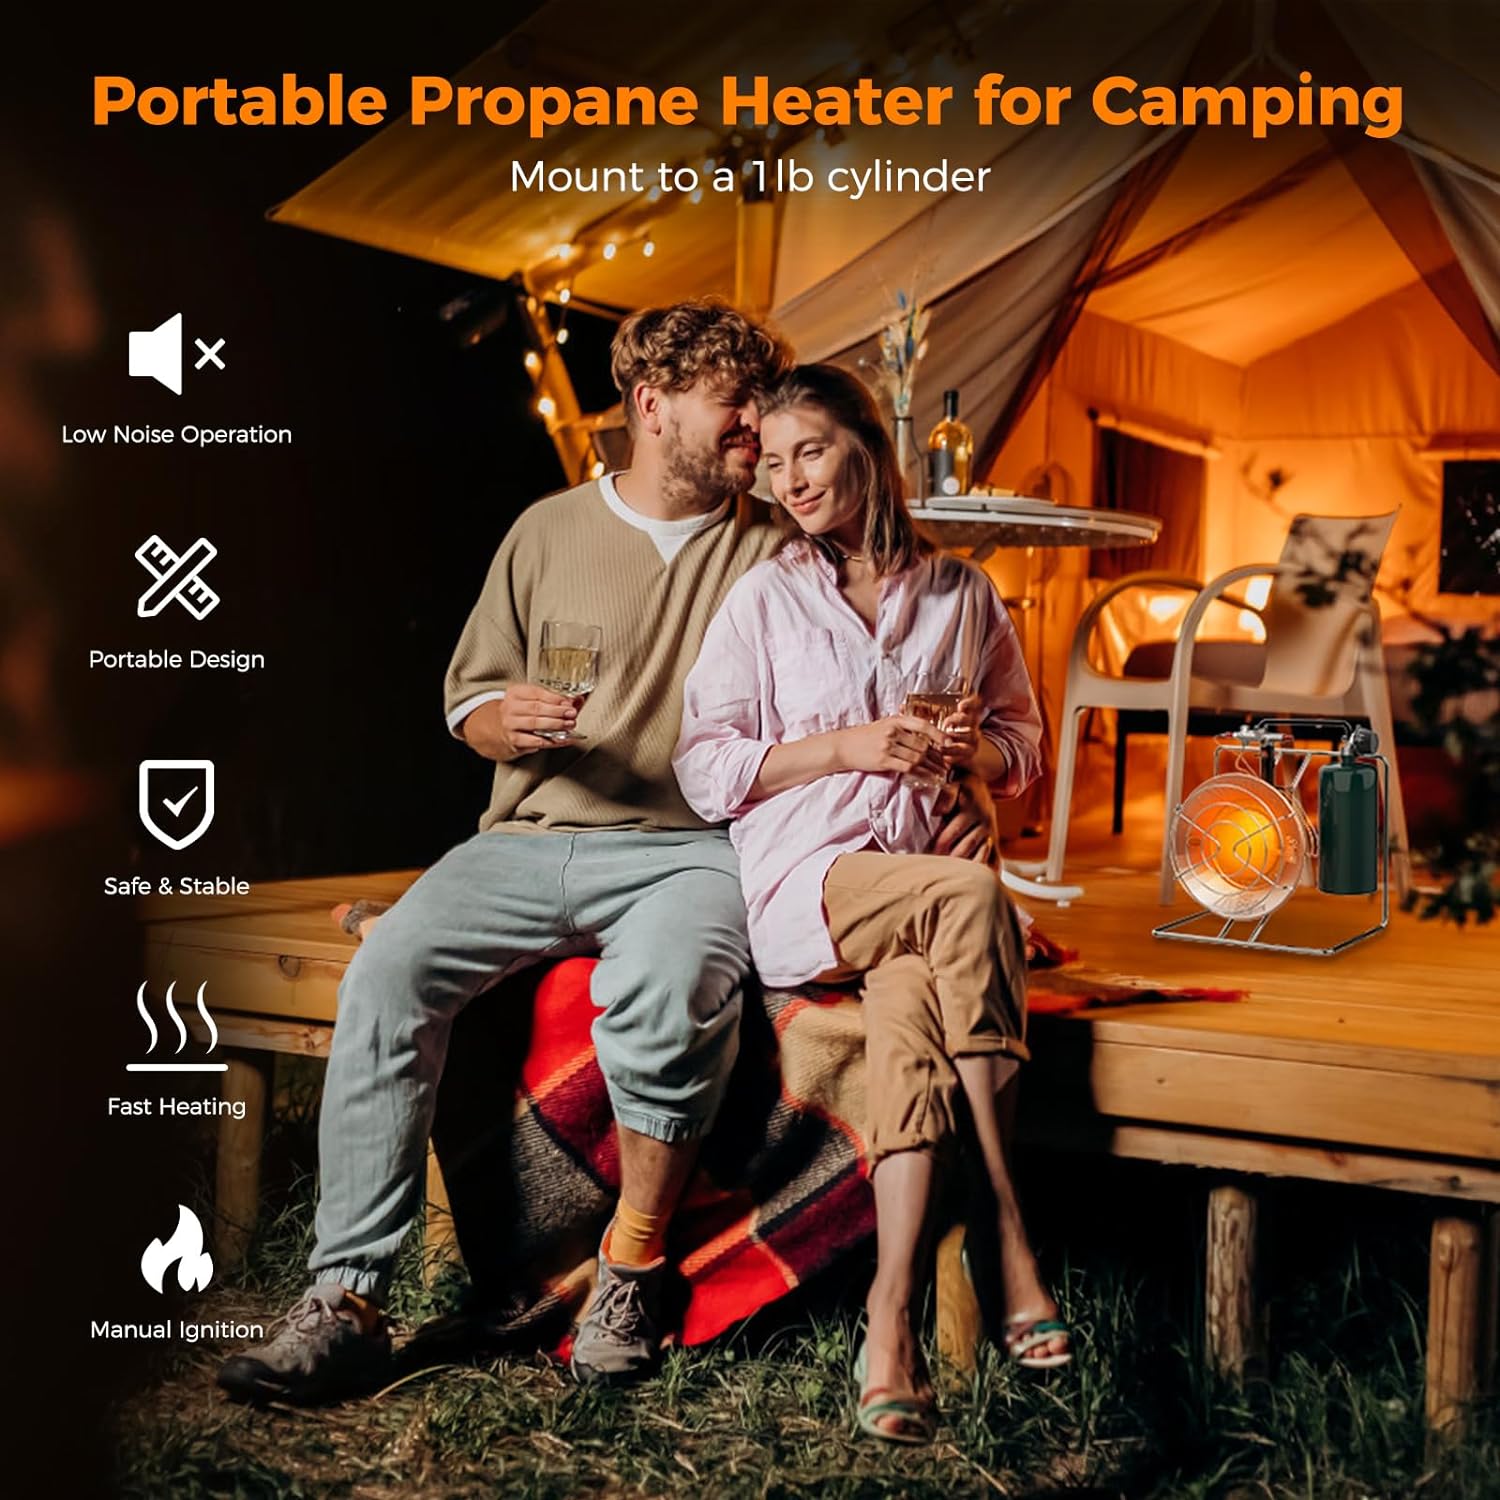 CAMPLUX Portable Propane Heater, 15,000 BTU Outdoor Gas Heater with Framed Handle for Patio, Camping, Hunting, Garage, Outdoor Use - CAMPLUX Portable Propane Heater Review